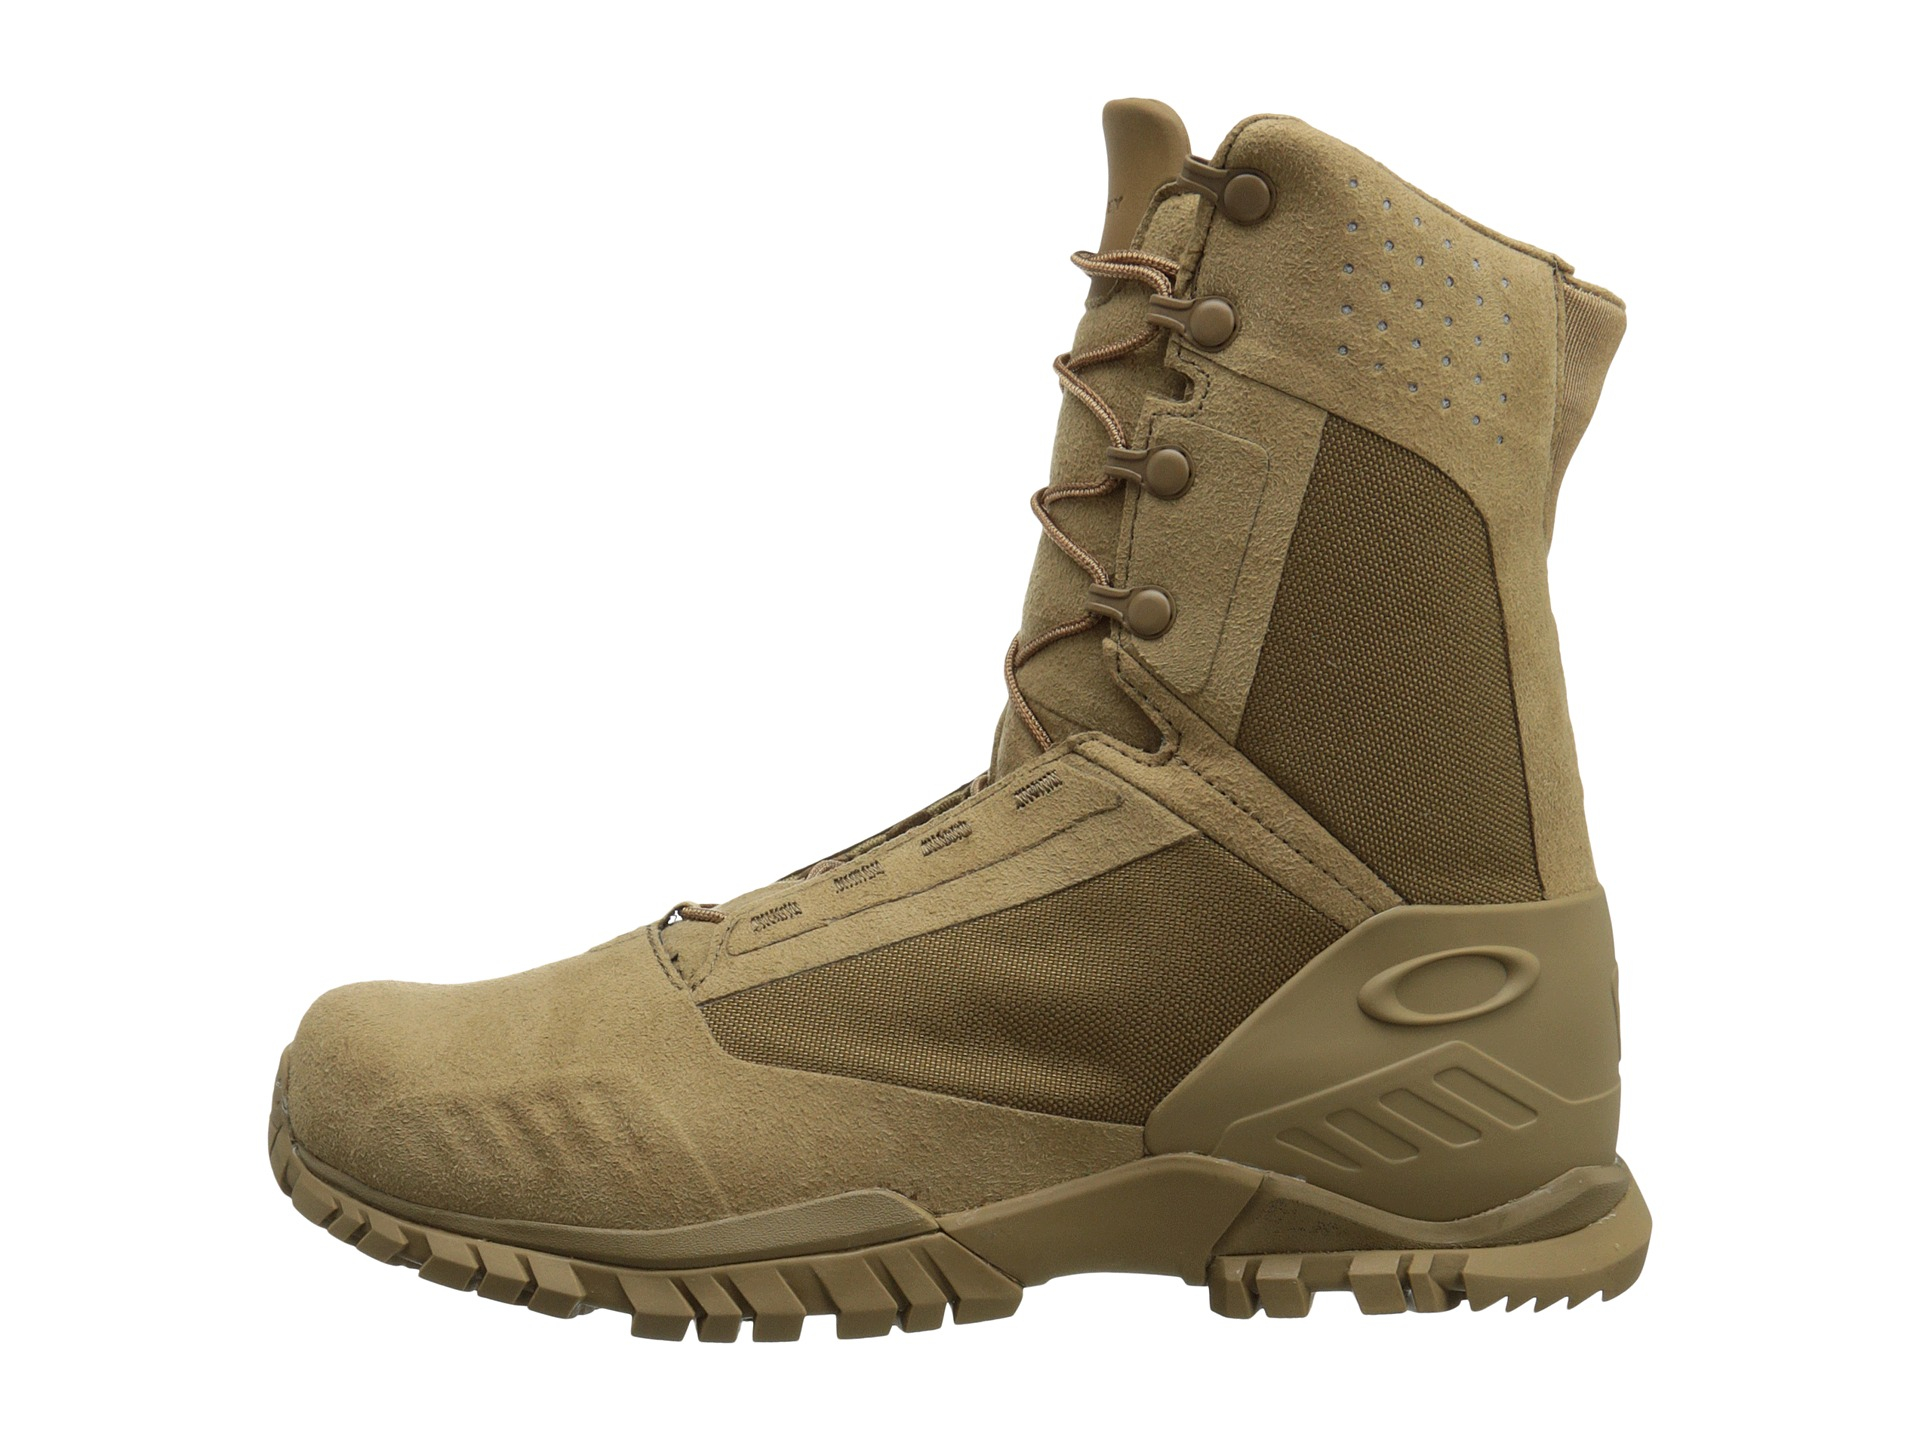 Oakley Military Boots